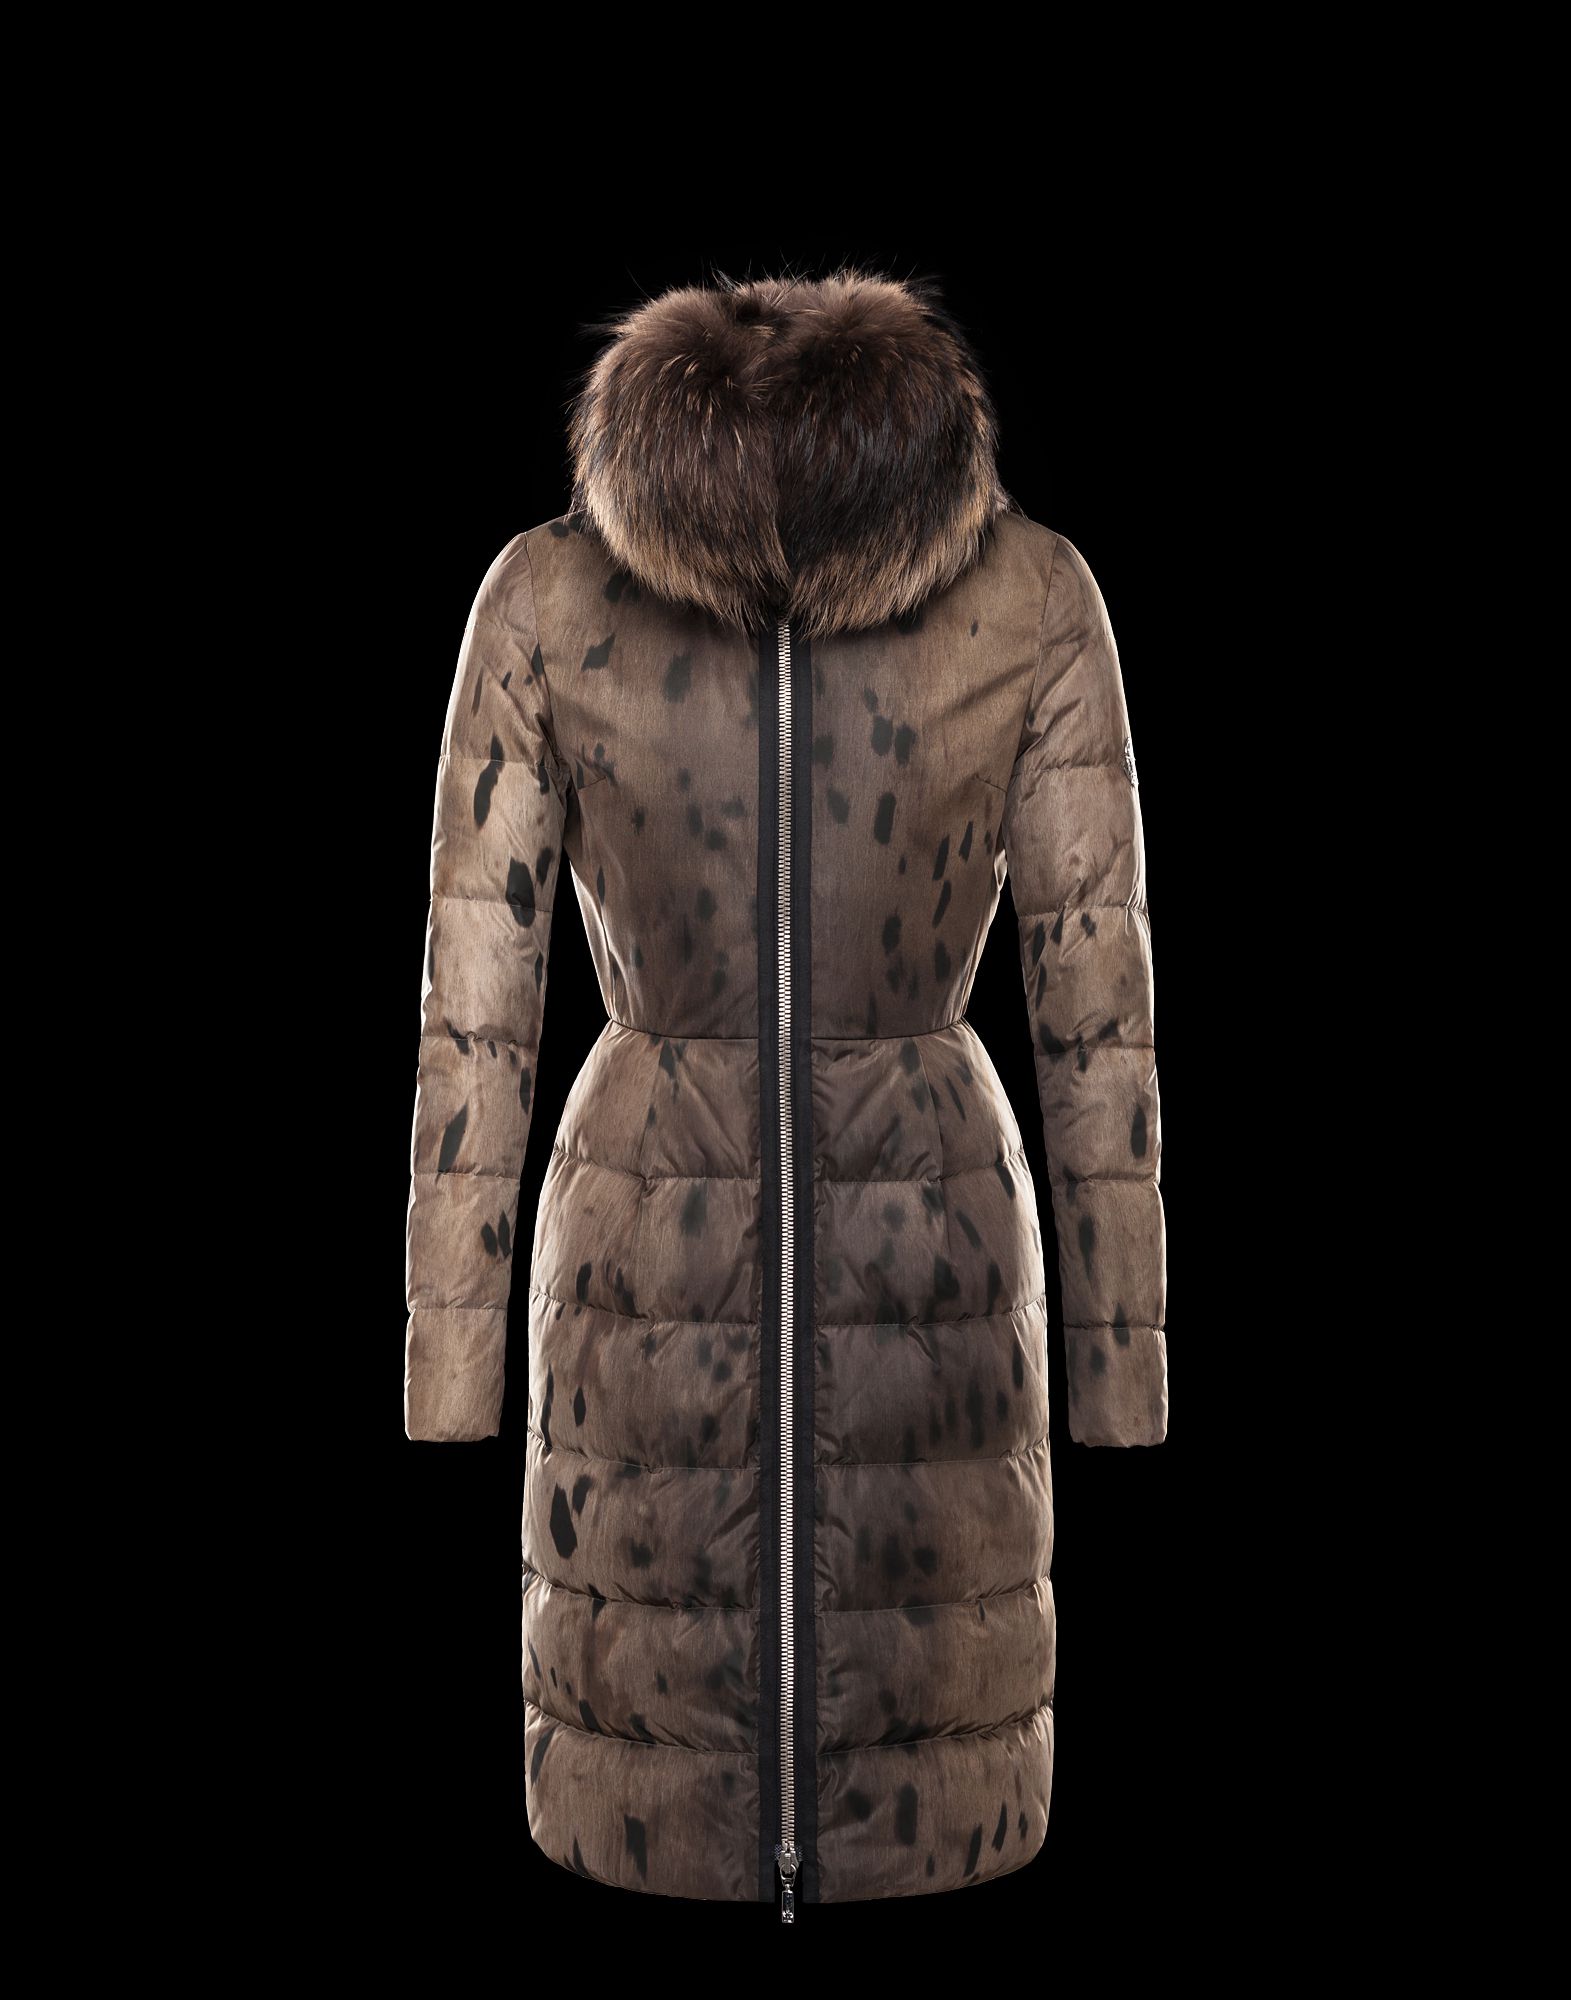 black friday saldi piumini moncler | Spend $158 Or More \u0026 Receive Free  Ground Shipping This Week Only.